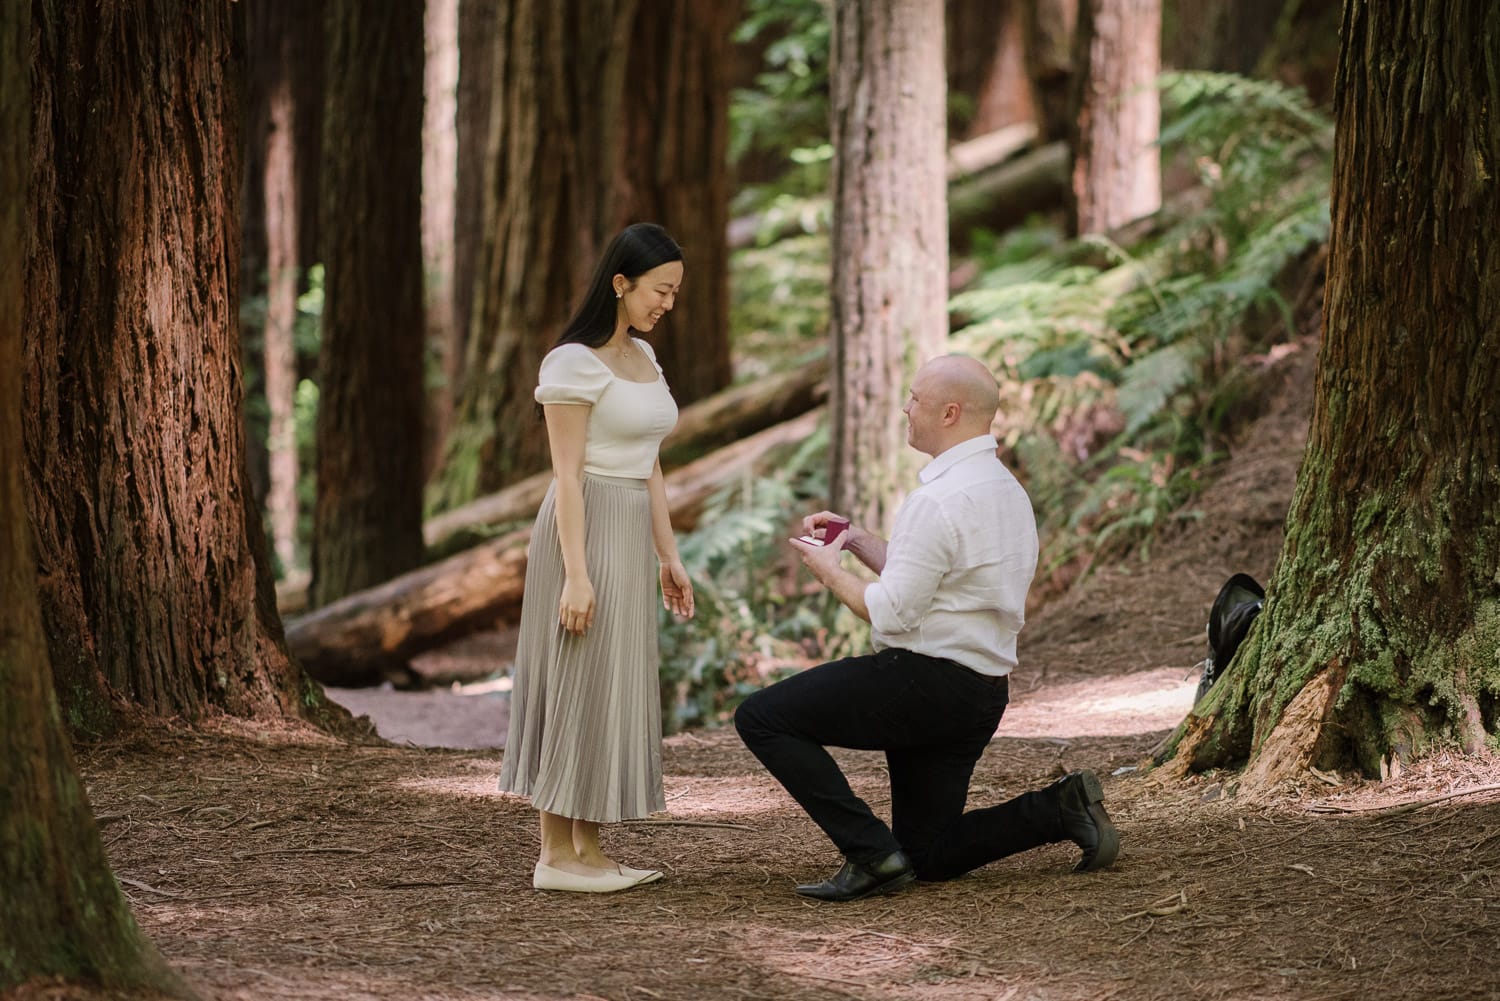 Wedding proposal taking place at the Redwood forest in the Otways national park.